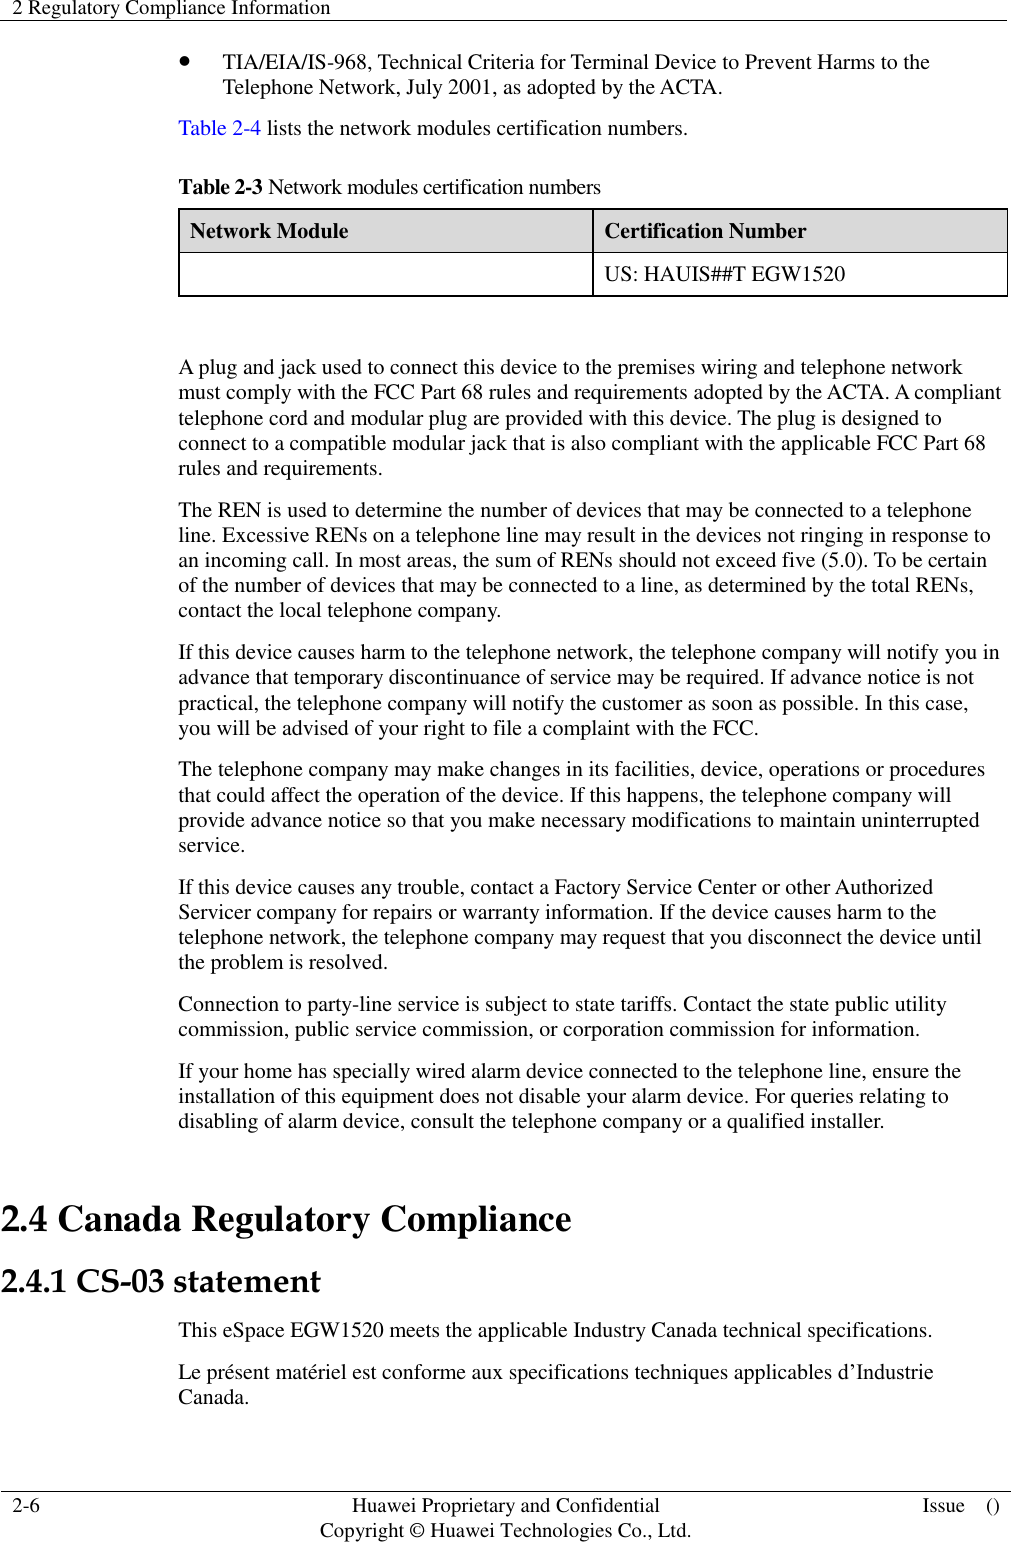 2 Regulatory Compliance Information    2-6 Huawei Proprietary and Confidential                                     Copyright © Huawei Technologies Co., Ltd. Issue    ()   TIA/EIA/IS-968, Technical Criteria for Terminal Device to Prevent Harms to the Telephone Network, July 2001, as adopted by the ACTA. Table 2-4 lists the network modules certification numbers. Table 2-3 Network modules certification numbers Network Module Certification Number  US: HAUIS##T EGW1520  A plug and jack used to connect this device to the premises wiring and telephone network must comply with the FCC Part 68 rules and requirements adopted by the ACTA. A compliant telephone cord and modular plug are provided with this device. The plug is designed to connect to a compatible modular jack that is also compliant with the applicable FCC Part 68 rules and requirements. The REN is used to determine the number of devices that may be connected to a telephone line. Excessive RENs on a telephone line may result in the devices not ringing in response to an incoming call. In most areas, the sum of RENs should not exceed five (5.0). To be certain of the number of devices that may be connected to a line, as determined by the total RENs, contact the local telephone company.   If this device causes harm to the telephone network, the telephone company will notify you in advance that temporary discontinuance of service may be required. If advance notice is not practical, the telephone company will notify the customer as soon as possible. In this case, you will be advised of your right to file a complaint with the FCC. The telephone company may make changes in its facilities, device, operations or procedures that could affect the operation of the device. If this happens, the telephone company will provide advance notice so that you make necessary modifications to maintain uninterrupted service. If this device causes any trouble, contact a Factory Service Center or other Authorized Servicer company for repairs or warranty information. If the device causes harm to the telephone network, the telephone company may request that you disconnect the device until the problem is resolved. Connection to party-line service is subject to state tariffs. Contact the state public utility commission, public service commission, or corporation commission for information. If your home has specially wired alarm device connected to the telephone line, ensure the installation of this equipment does not disable your alarm device. For queries relating to disabling of alarm device, consult the telephone company or a qualified installer. 2.4 Canada Regulatory Compliance 2.4.1 CS-03 statement This eSpace EGW1520 meets the applicable Industry Canada technical specifications.   Le présent matériel est conforme aux specifications techniques applicables d’Industrie Canada. 